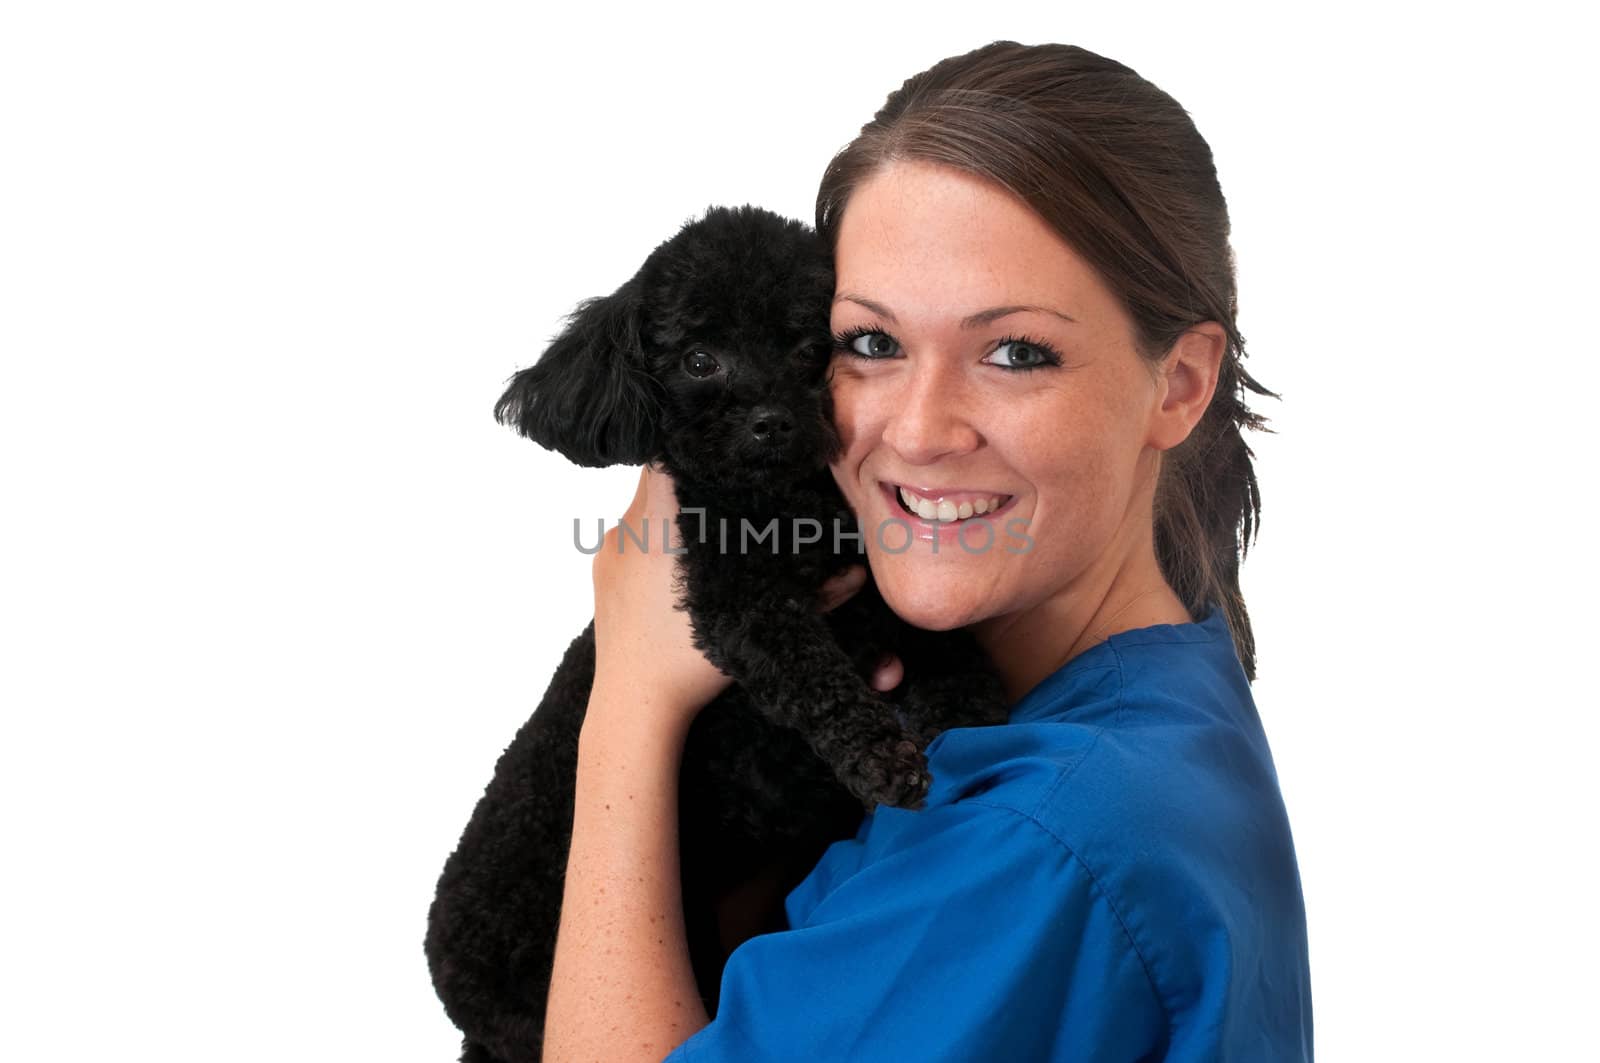 Veterinary assistant holding pet poodle isolated on white background with copy space.